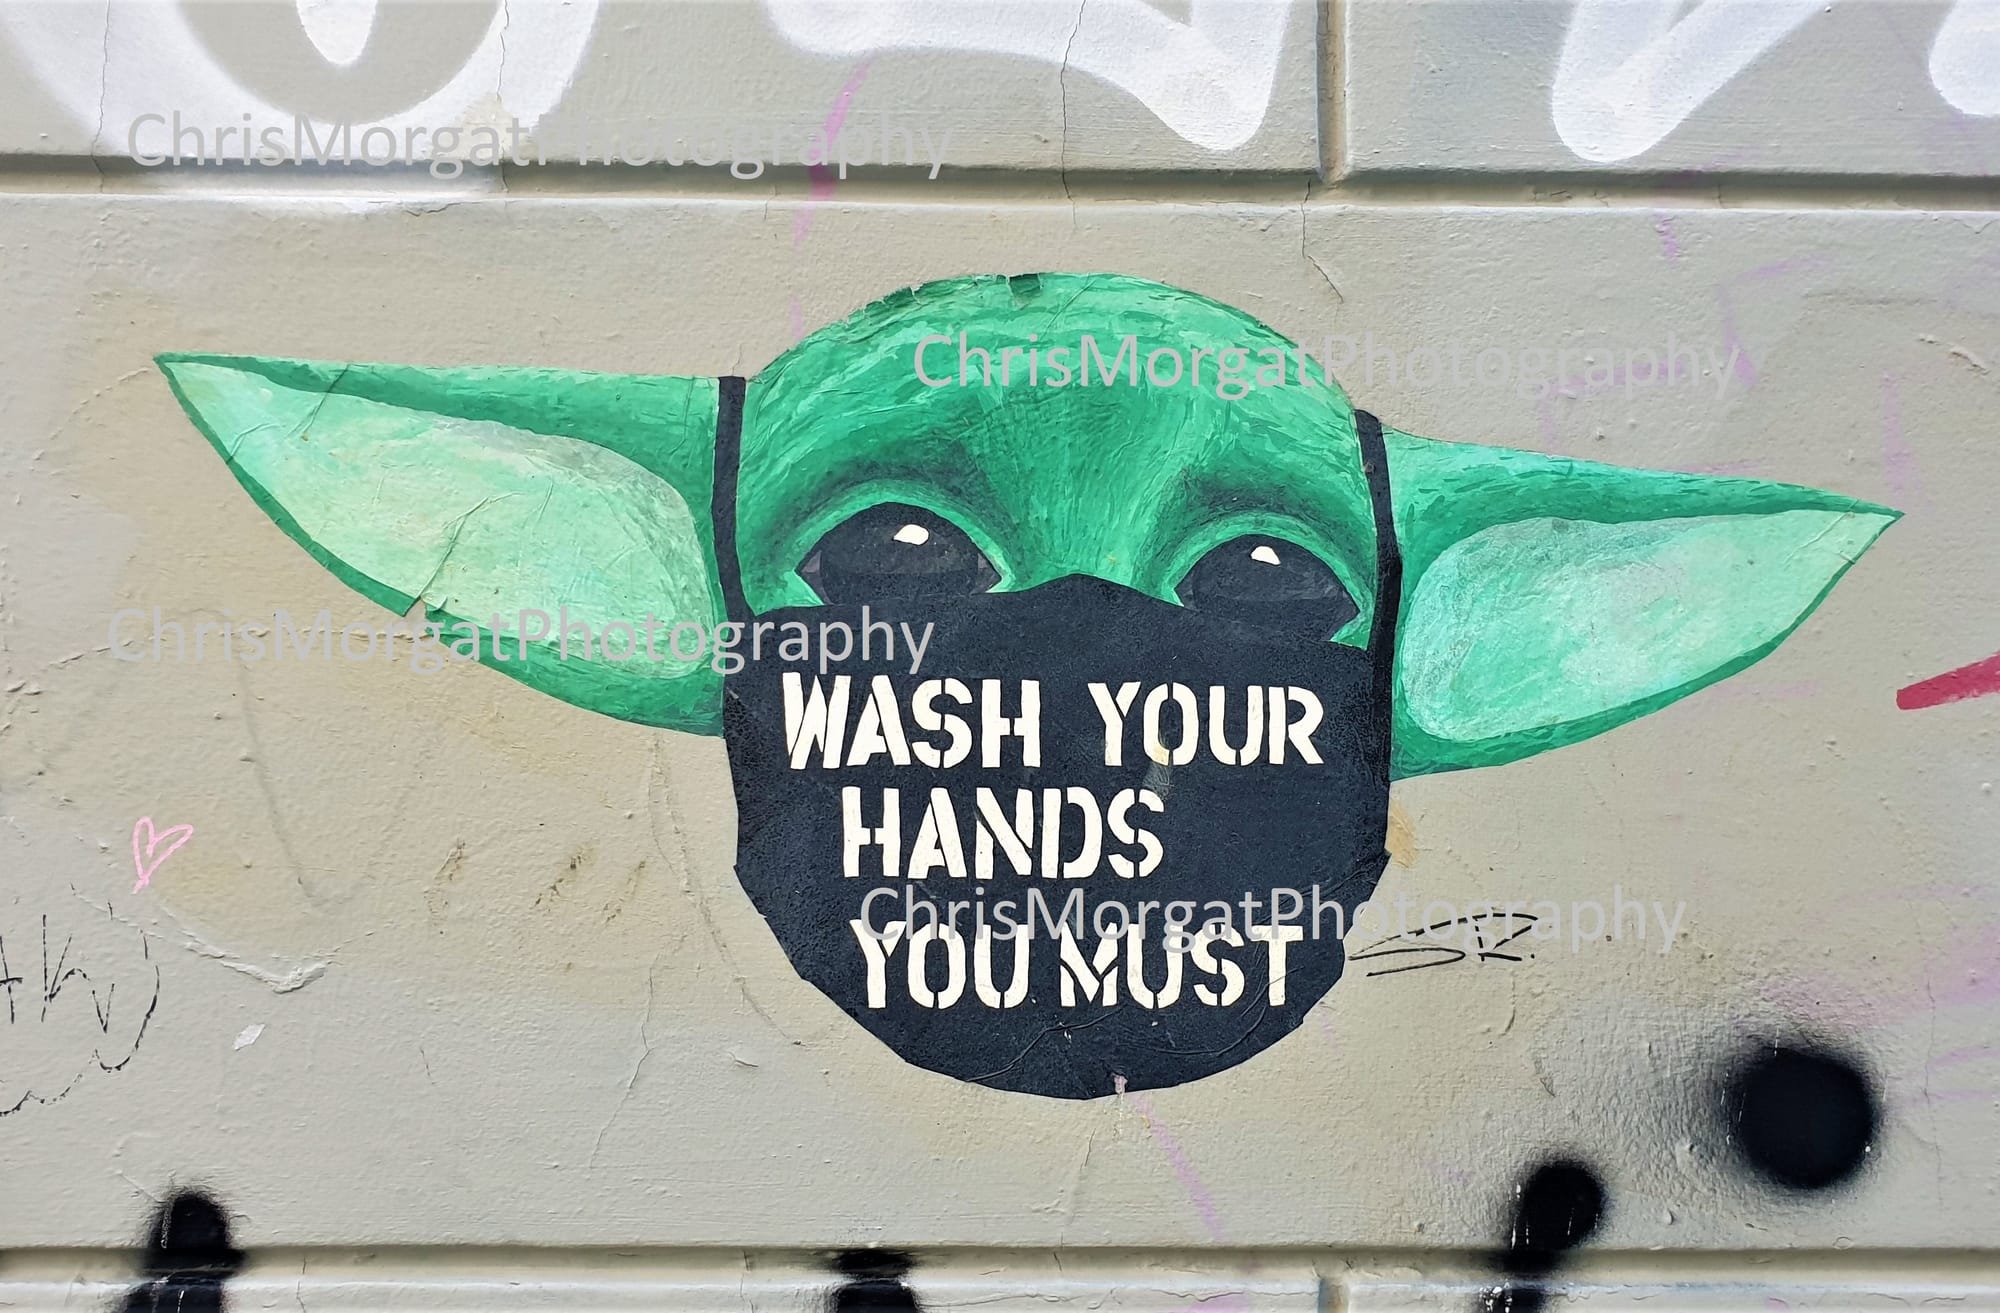 Some advice from Yoda, Bergen